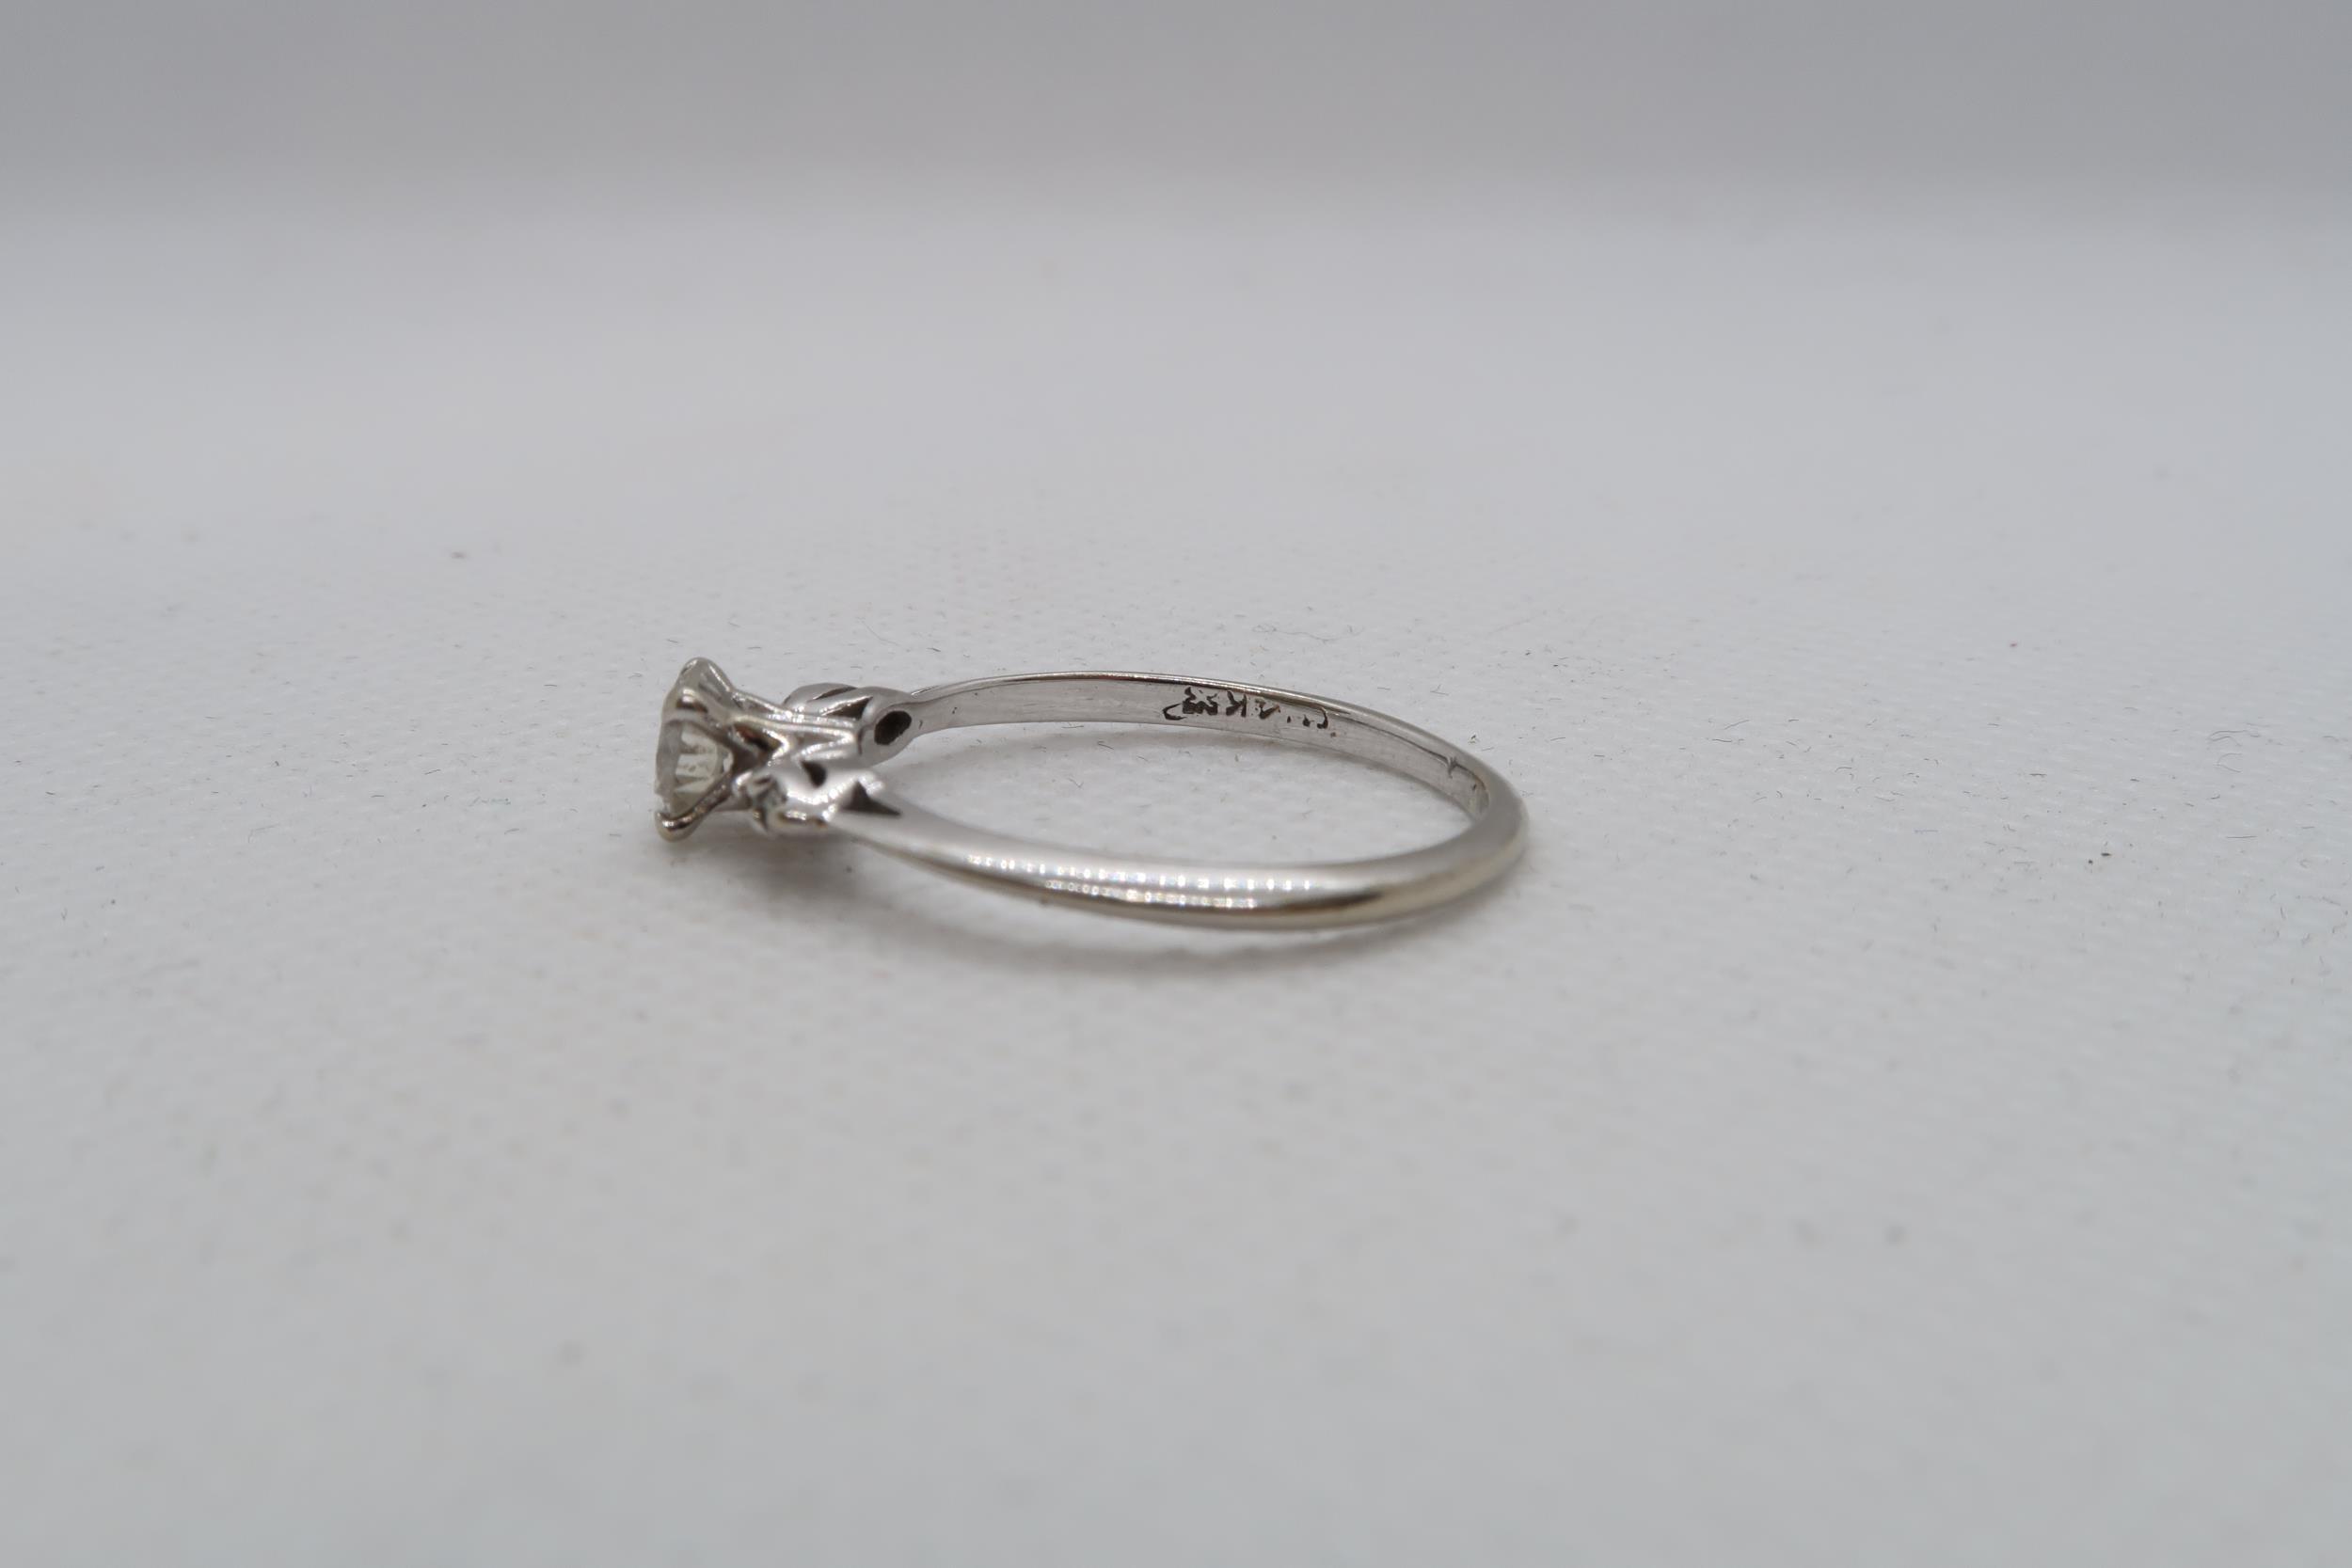 A 14ct white gold diamond ring with diamond shoulders - centre diamond approx 0.5ct - diamonds are - Image 3 of 4